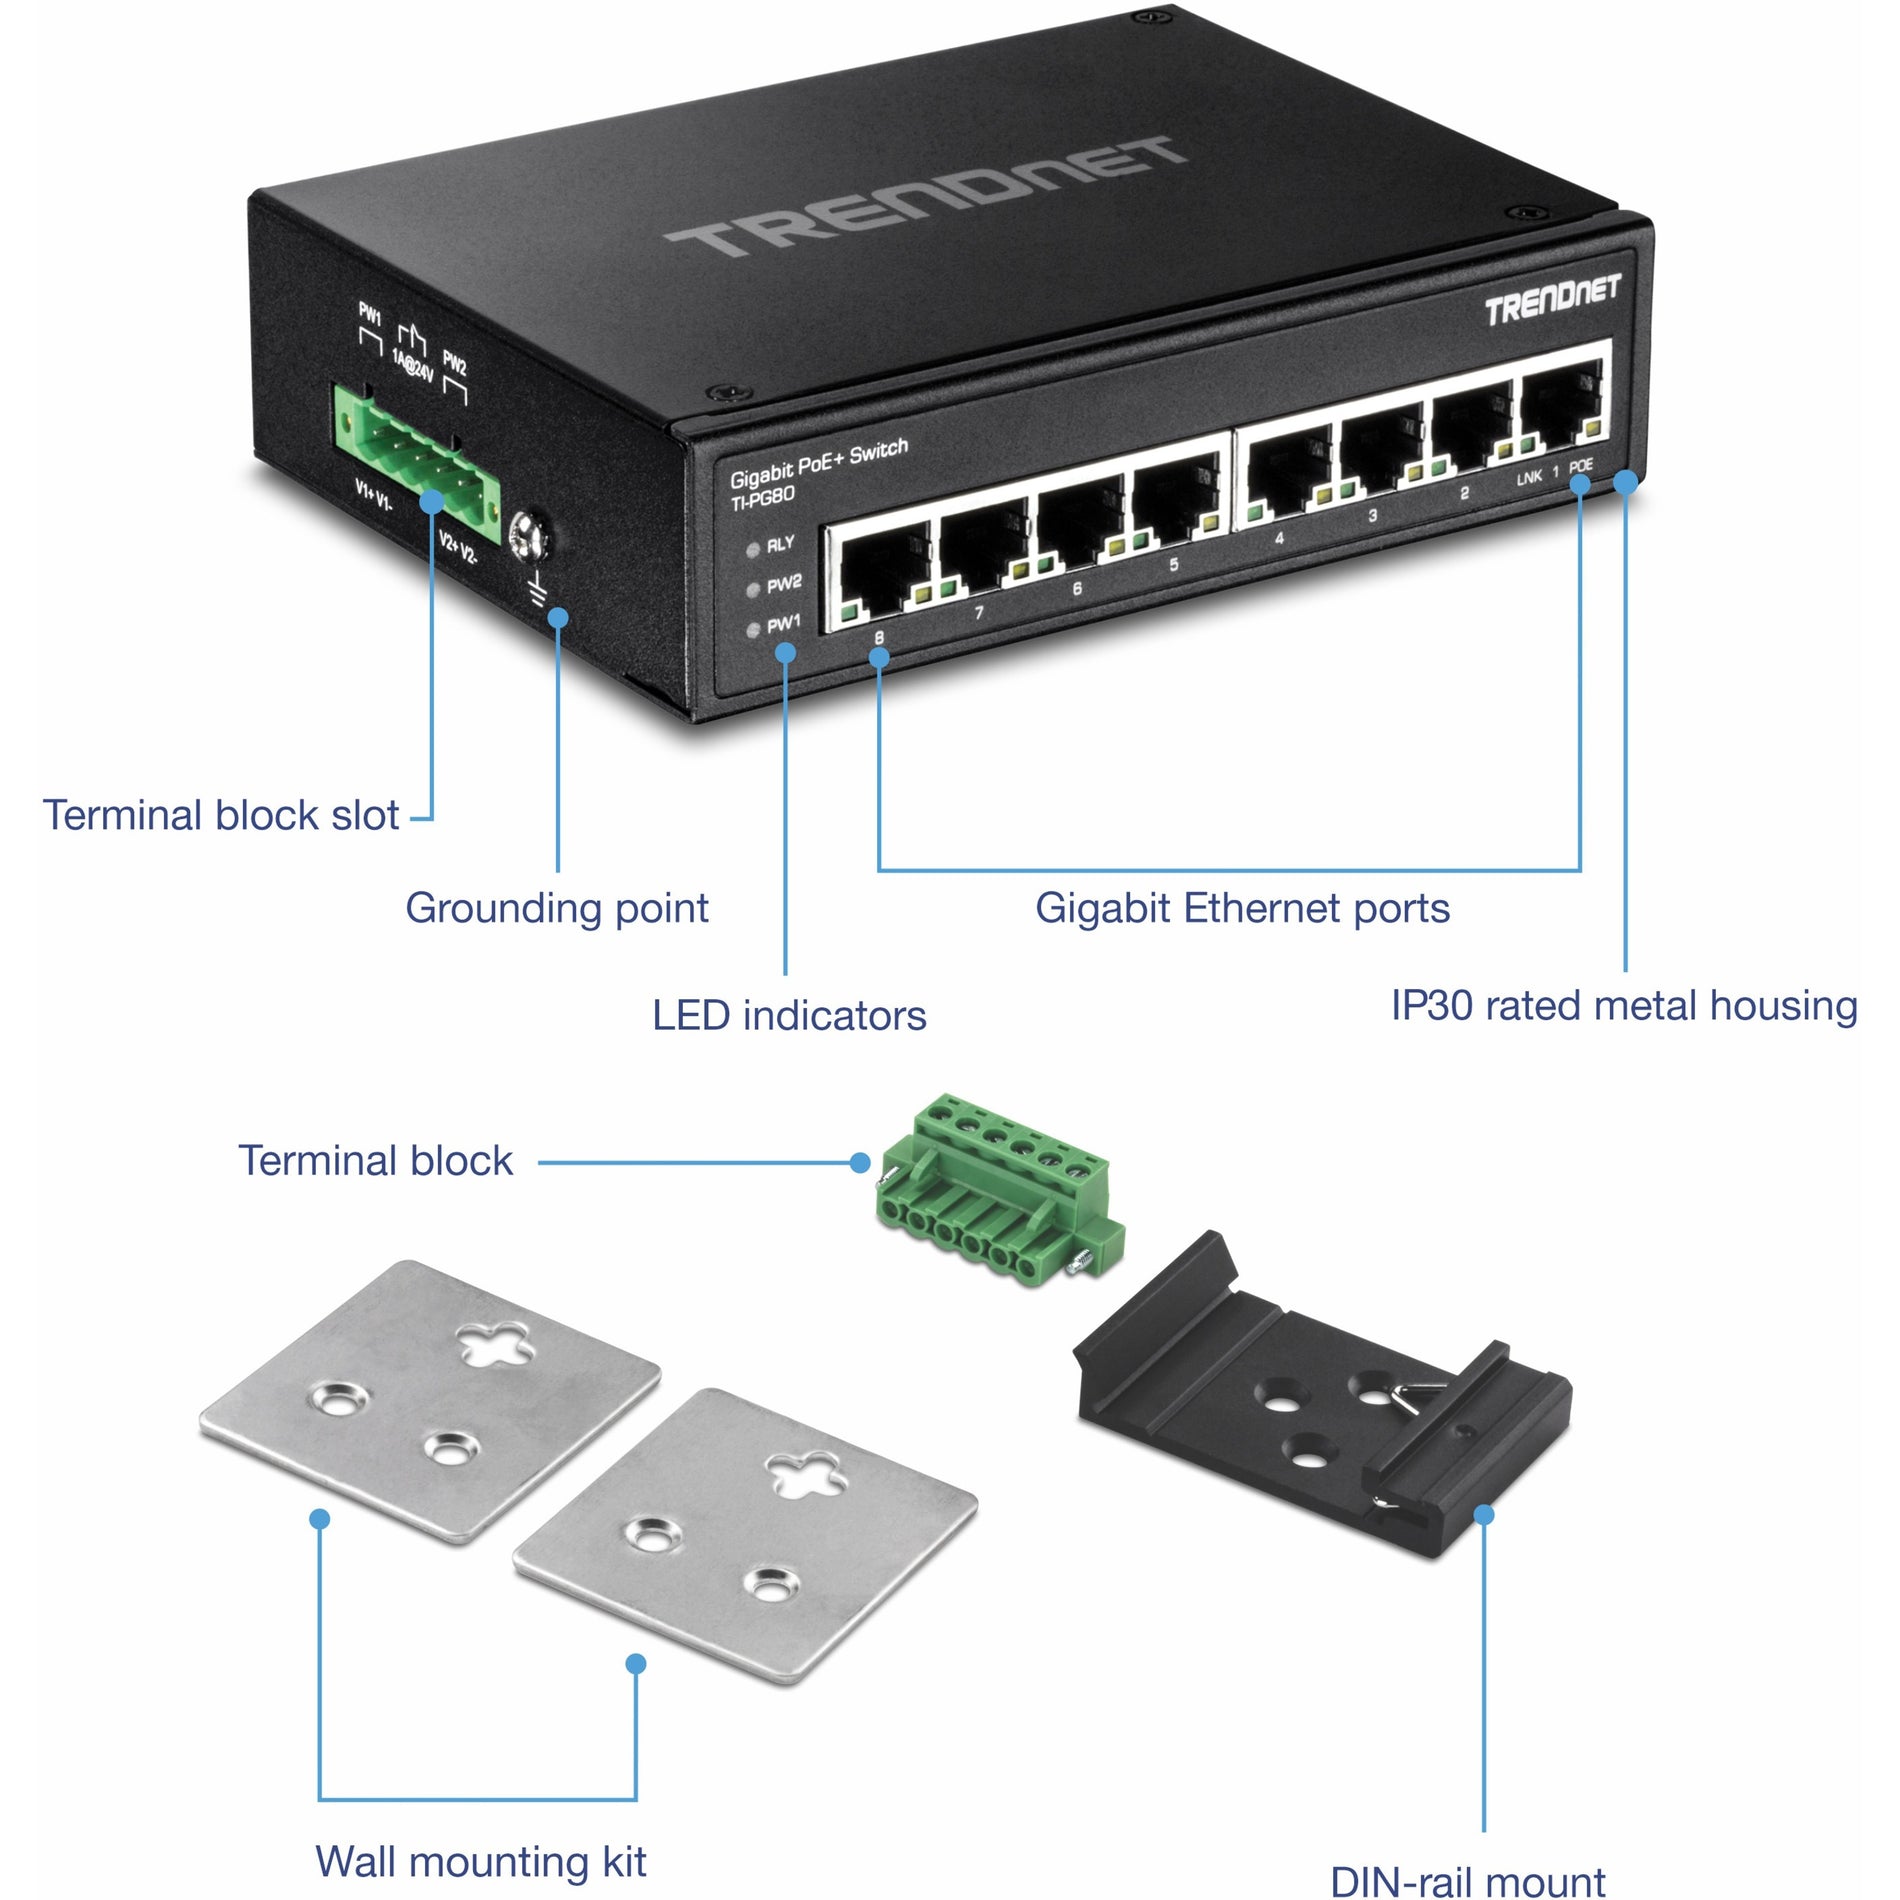 TRENDnet TI-PG80 8-port hardened Industrial Gigabit PoE+ Switch, 200W Full PoE+ Power Budget, 16 Gbps Switching Capacity, IP30 Rated Network Switch, Lifetime Protection